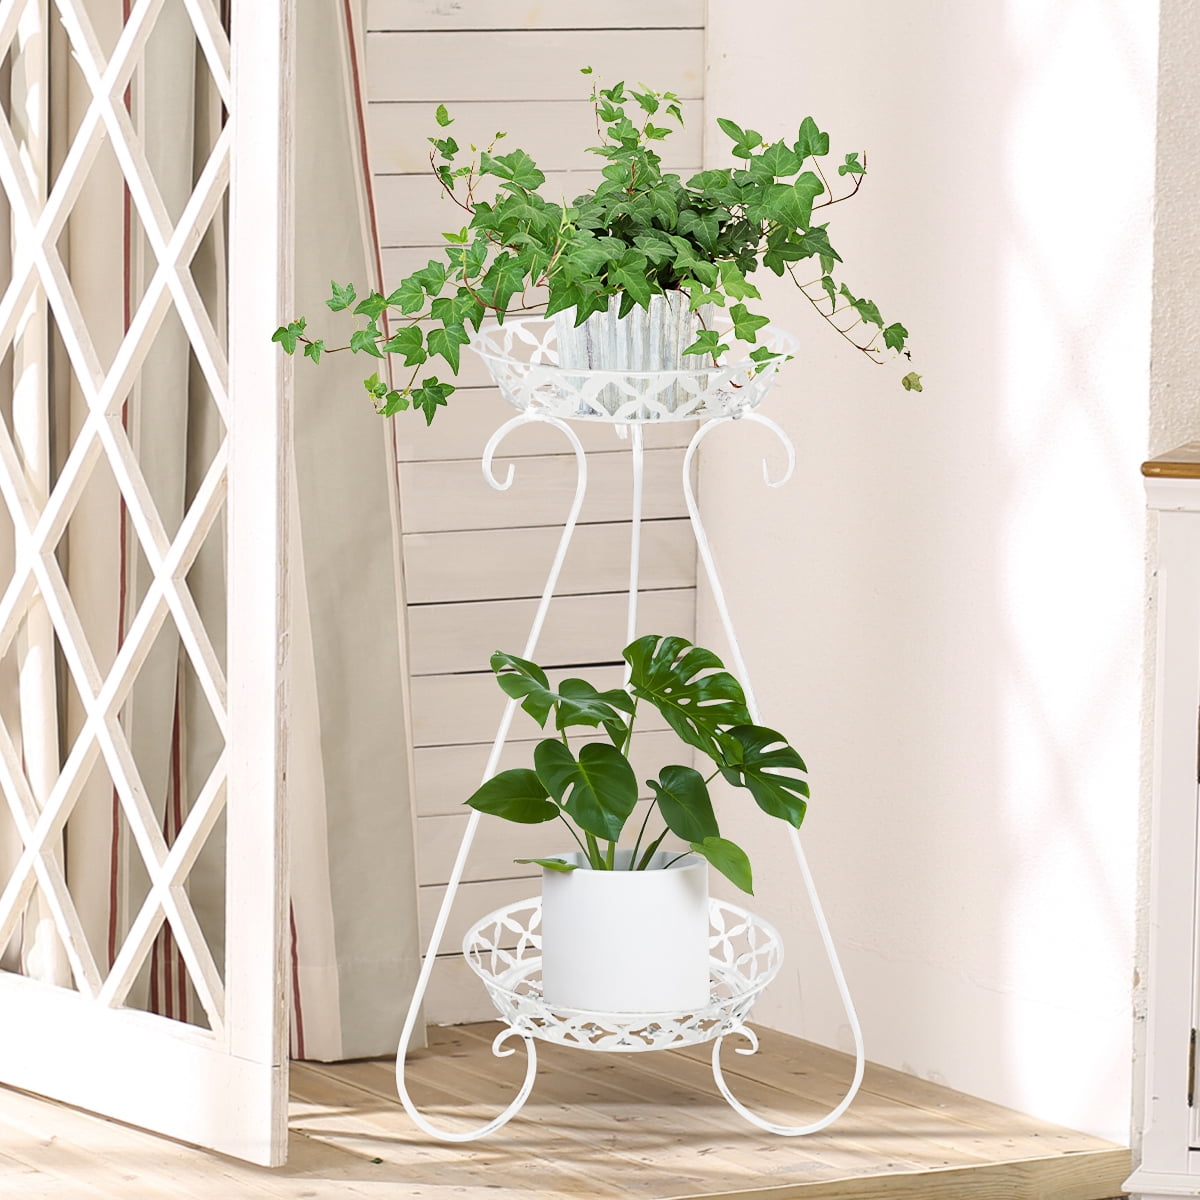 TREEZITEK 18.9inch Tall Plant Stand for Flower Pot Heavy Duty Potted Holder Indoor Outdoor Metal Rustproof Iron Garden Container Round Supports Rack for Planter 